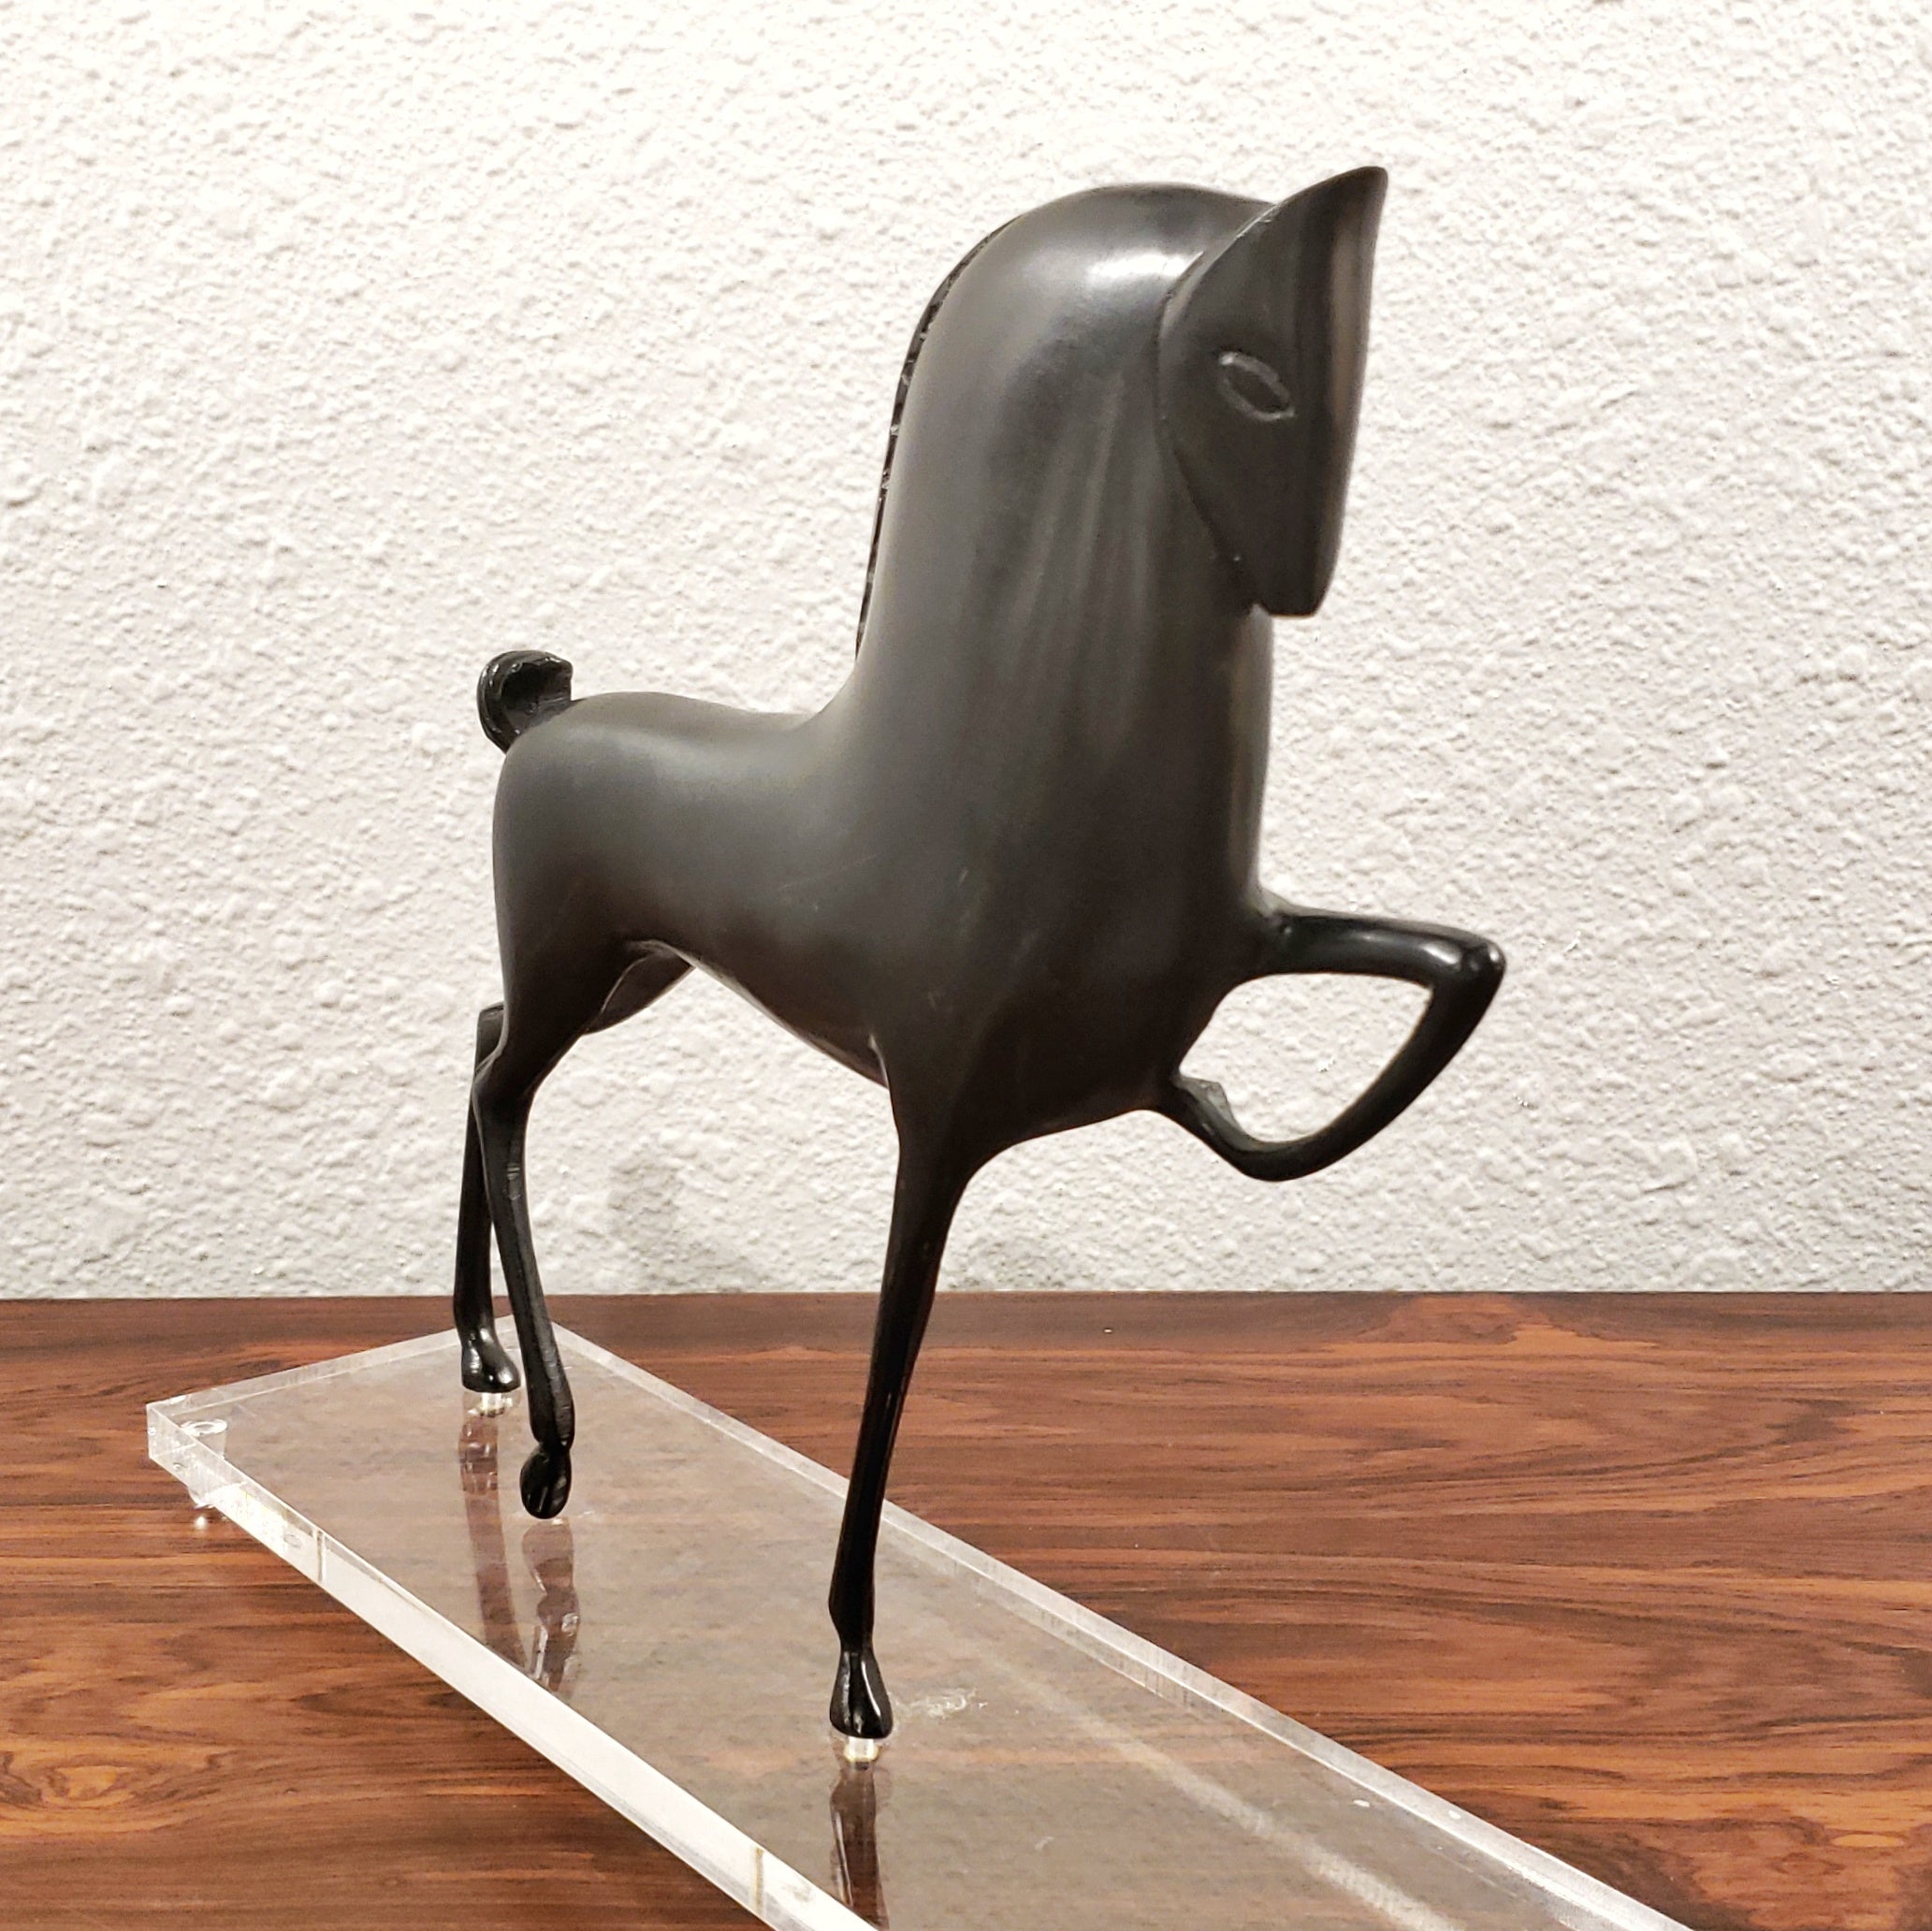 ETRUSCAN-STYLE BRONZE HORSE